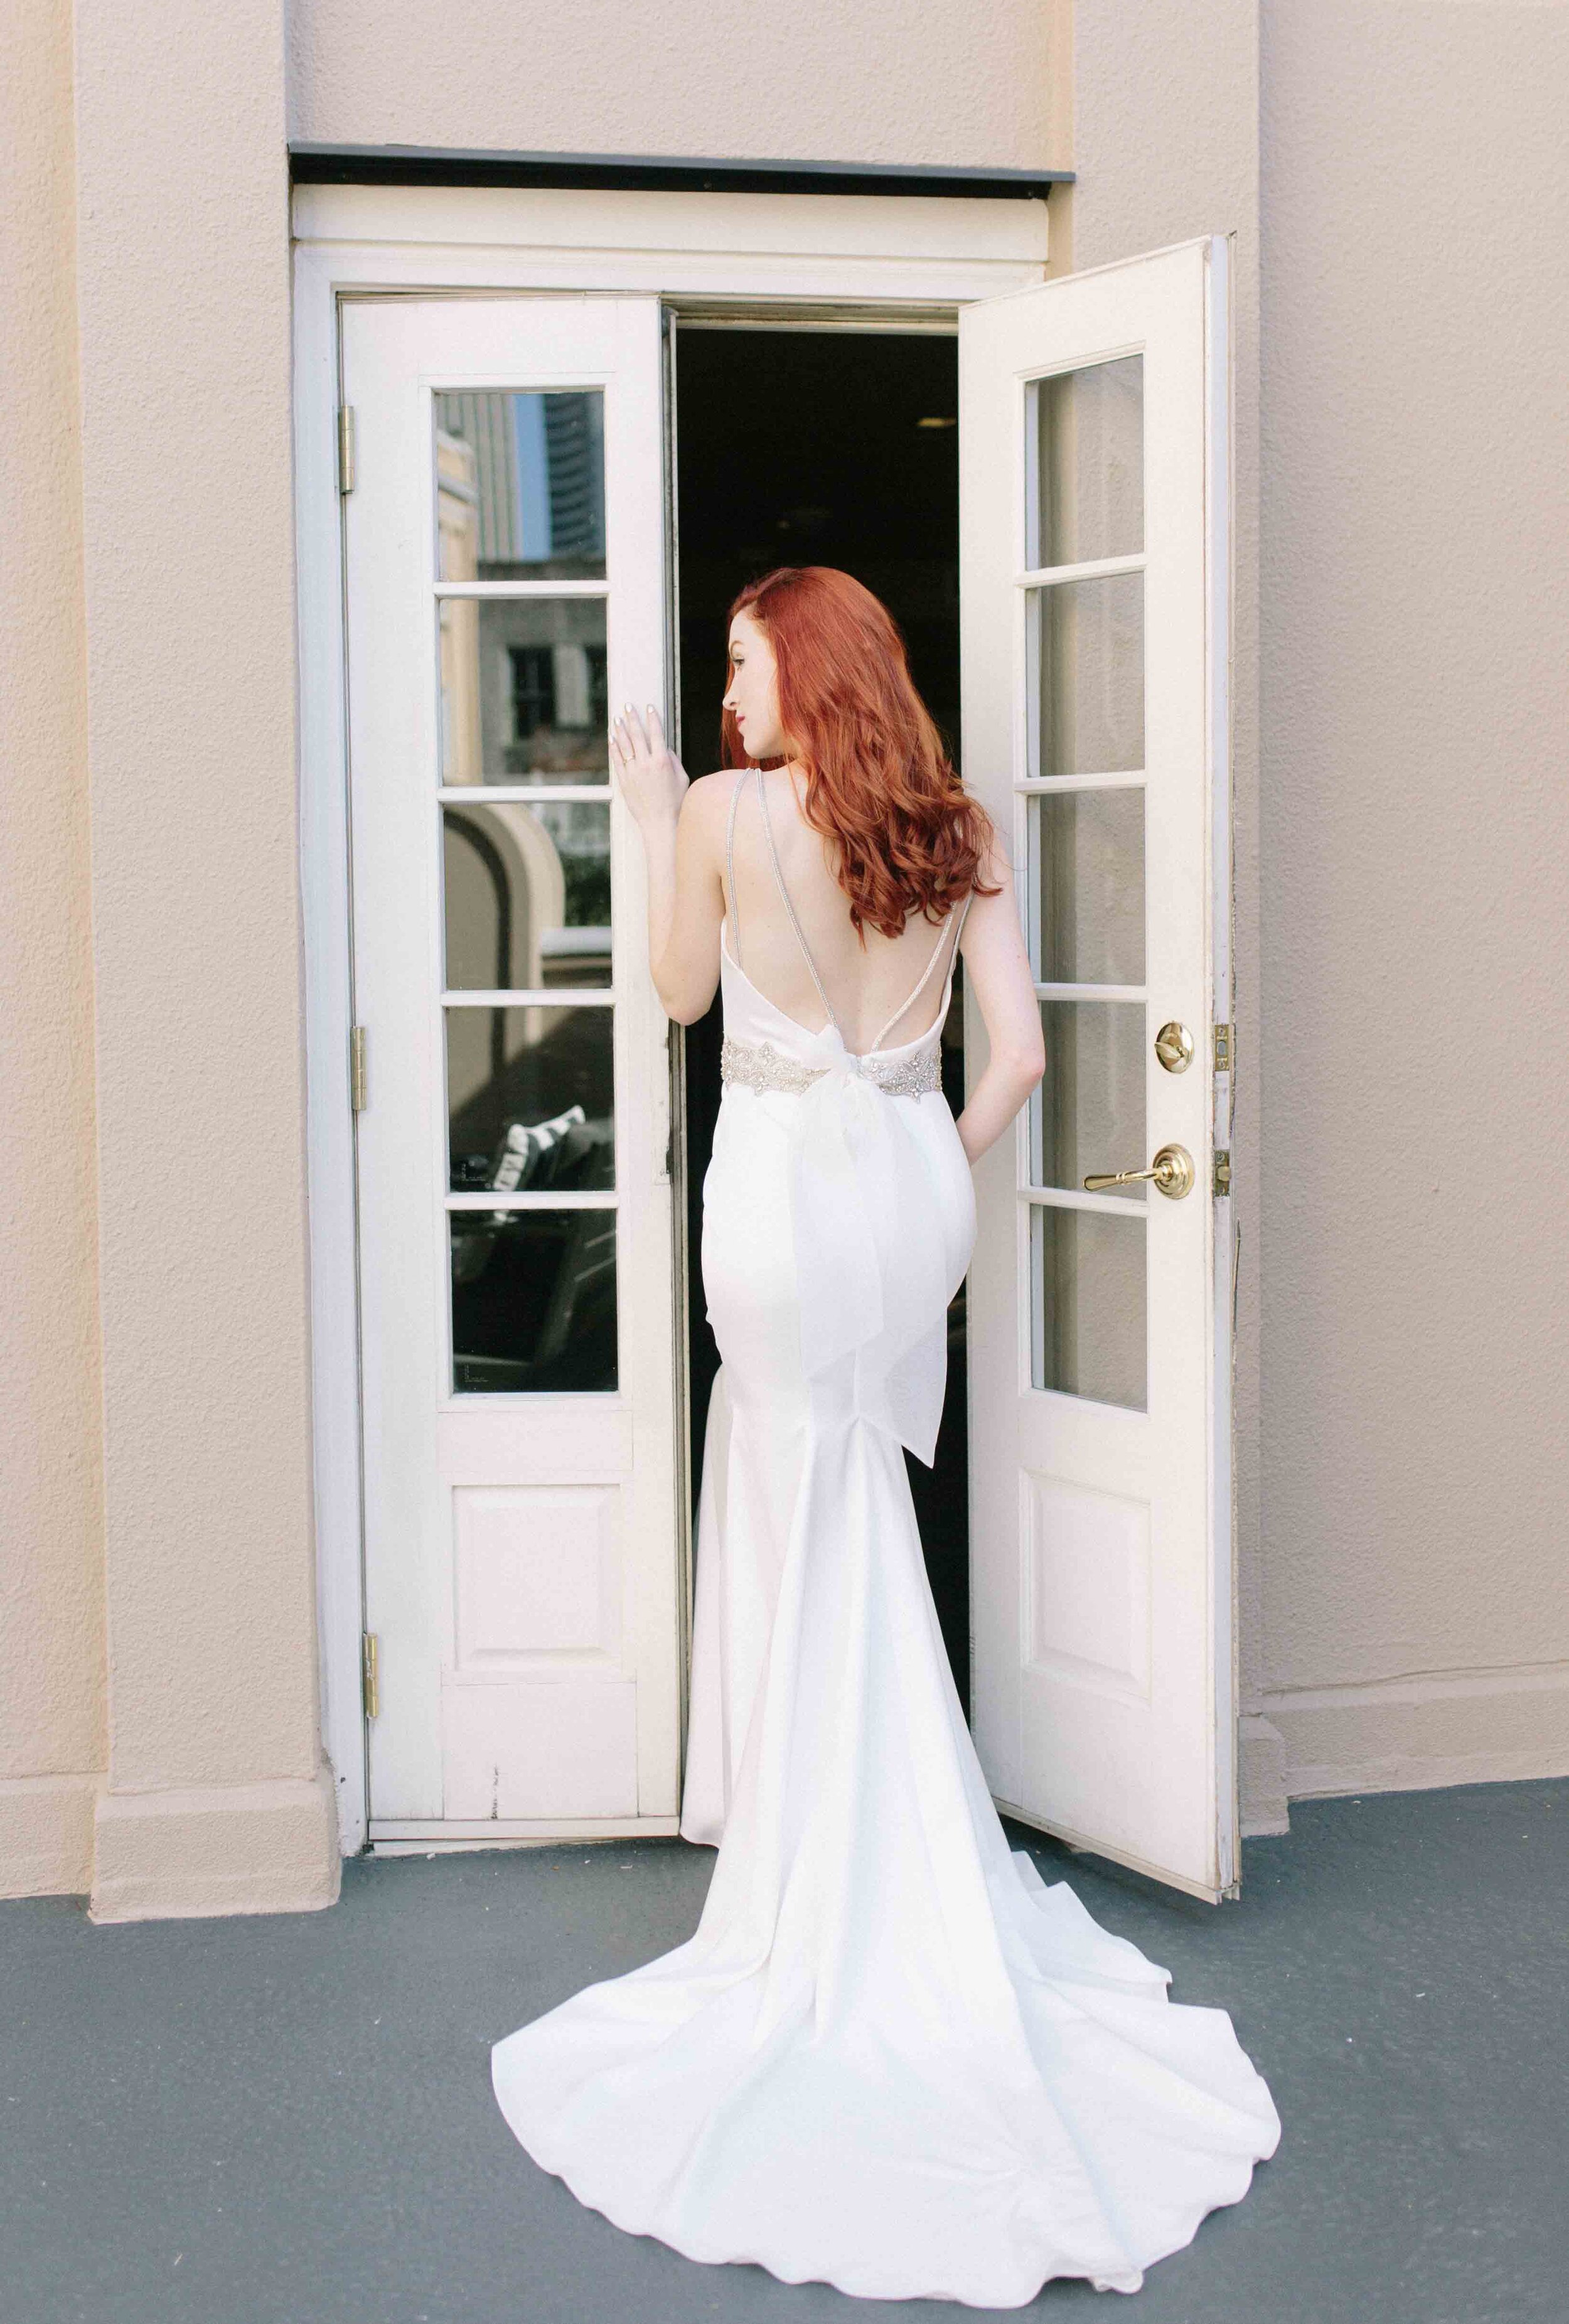 Down style hair with low back wedding dress